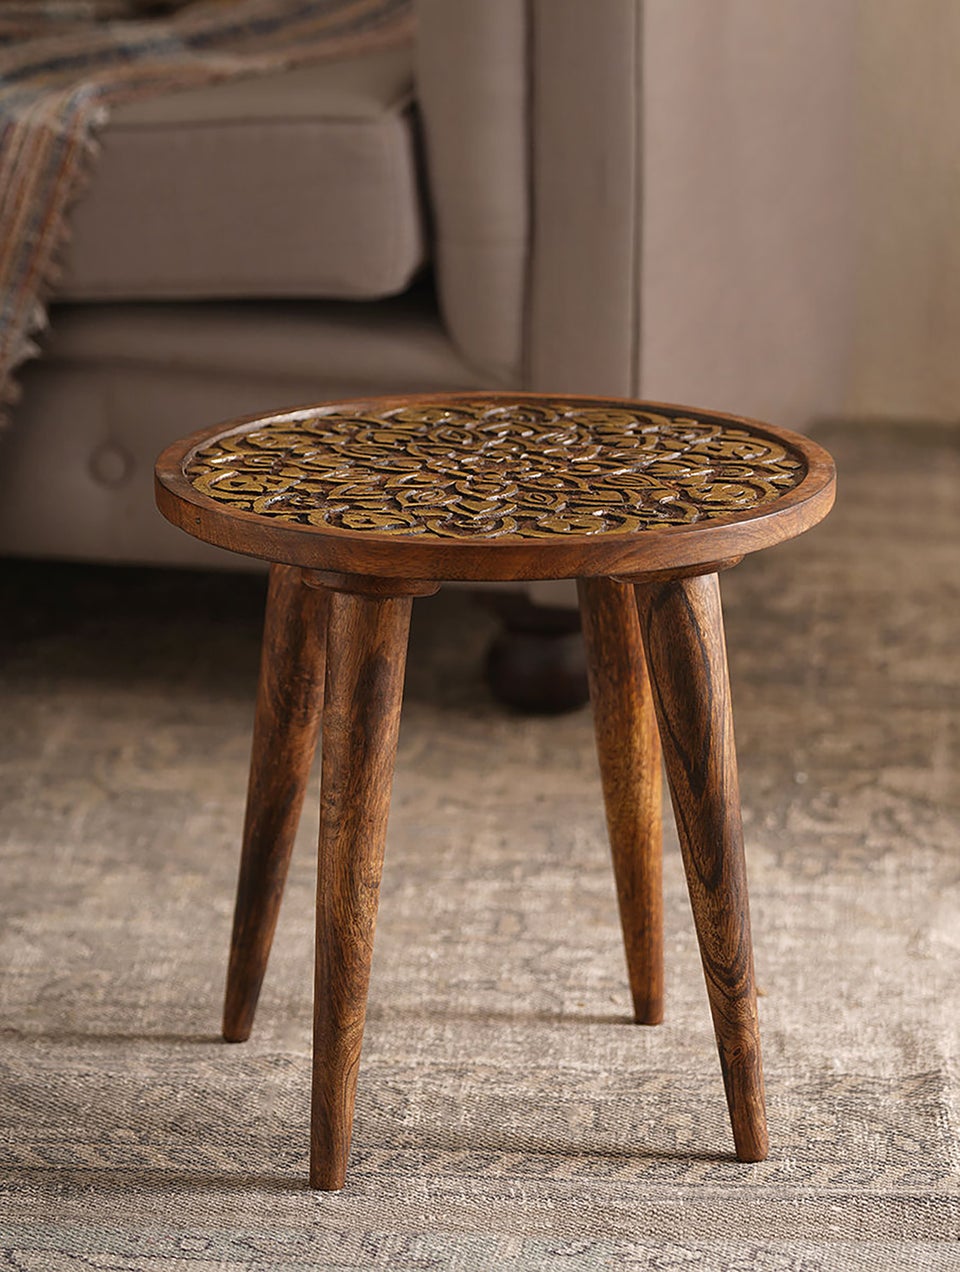 Handcarved Floral Nesting Table With Gold Foiling